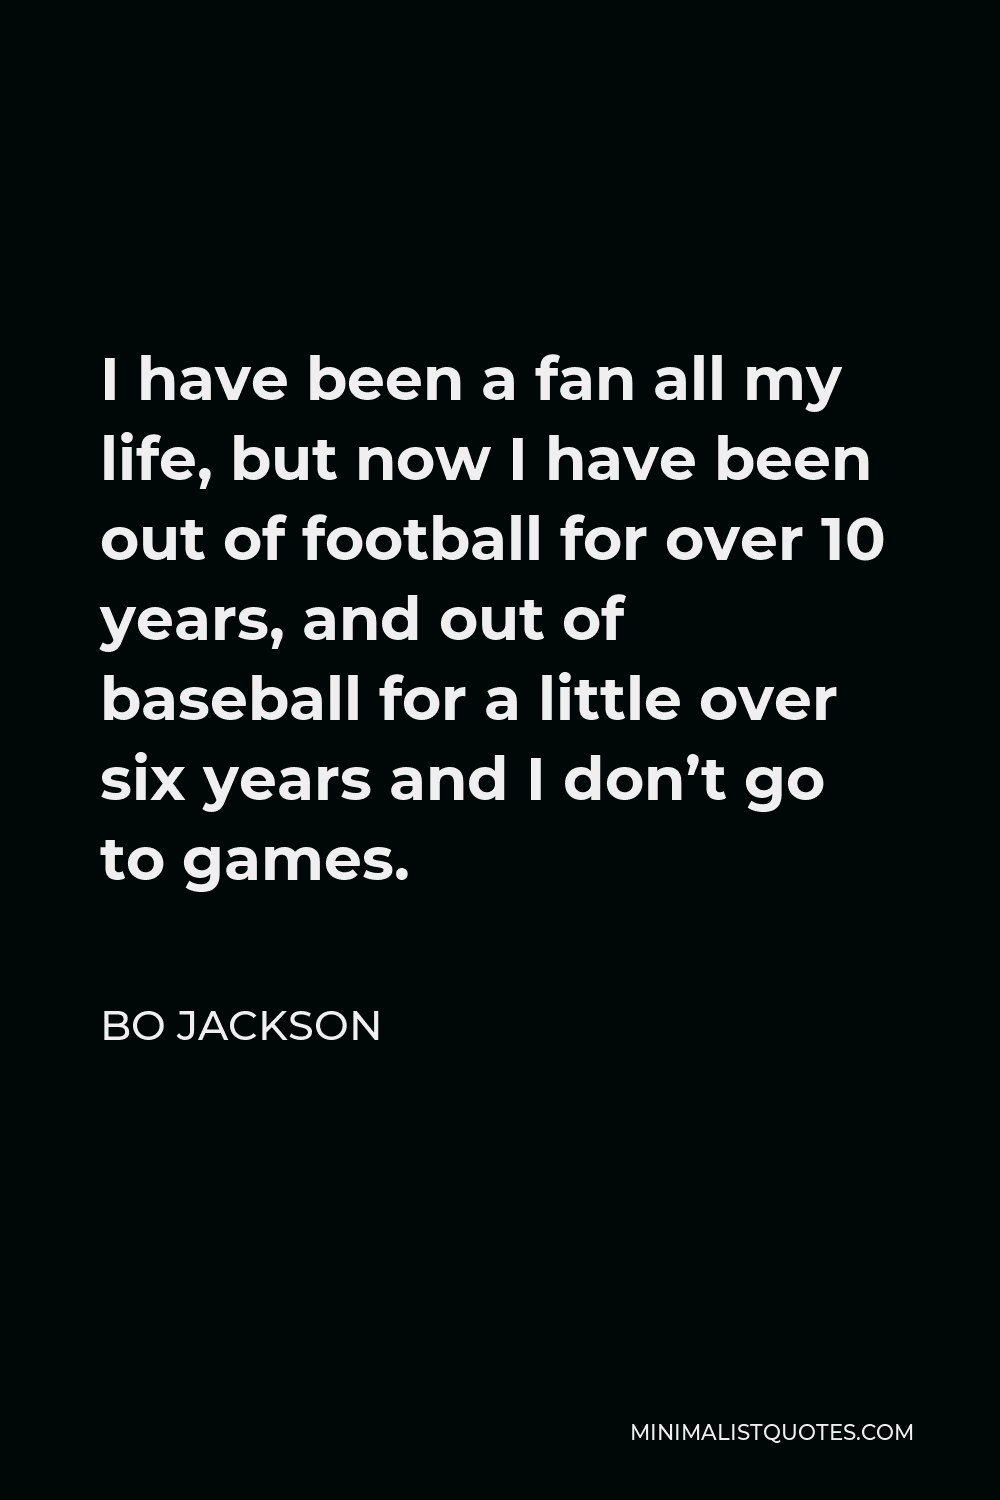 Bo Jackson Quote - I have been a fan all my life, but now I have been out of football for over 10 years, and out of baseball for a little over six years and I don’t go to games.